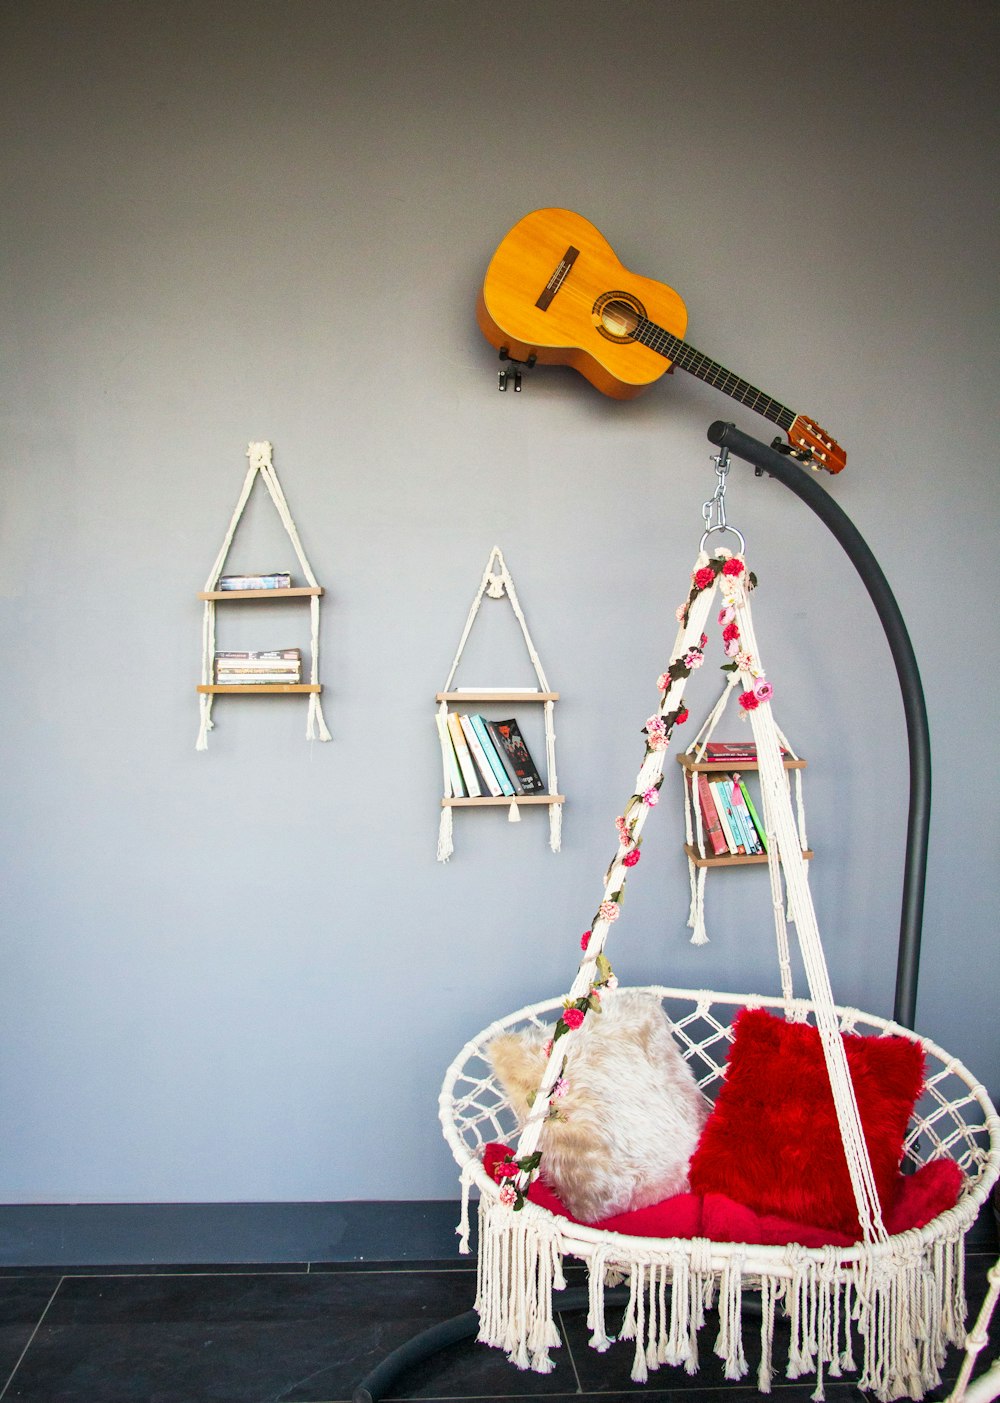 a guitar hanging on the wall next to a hammock